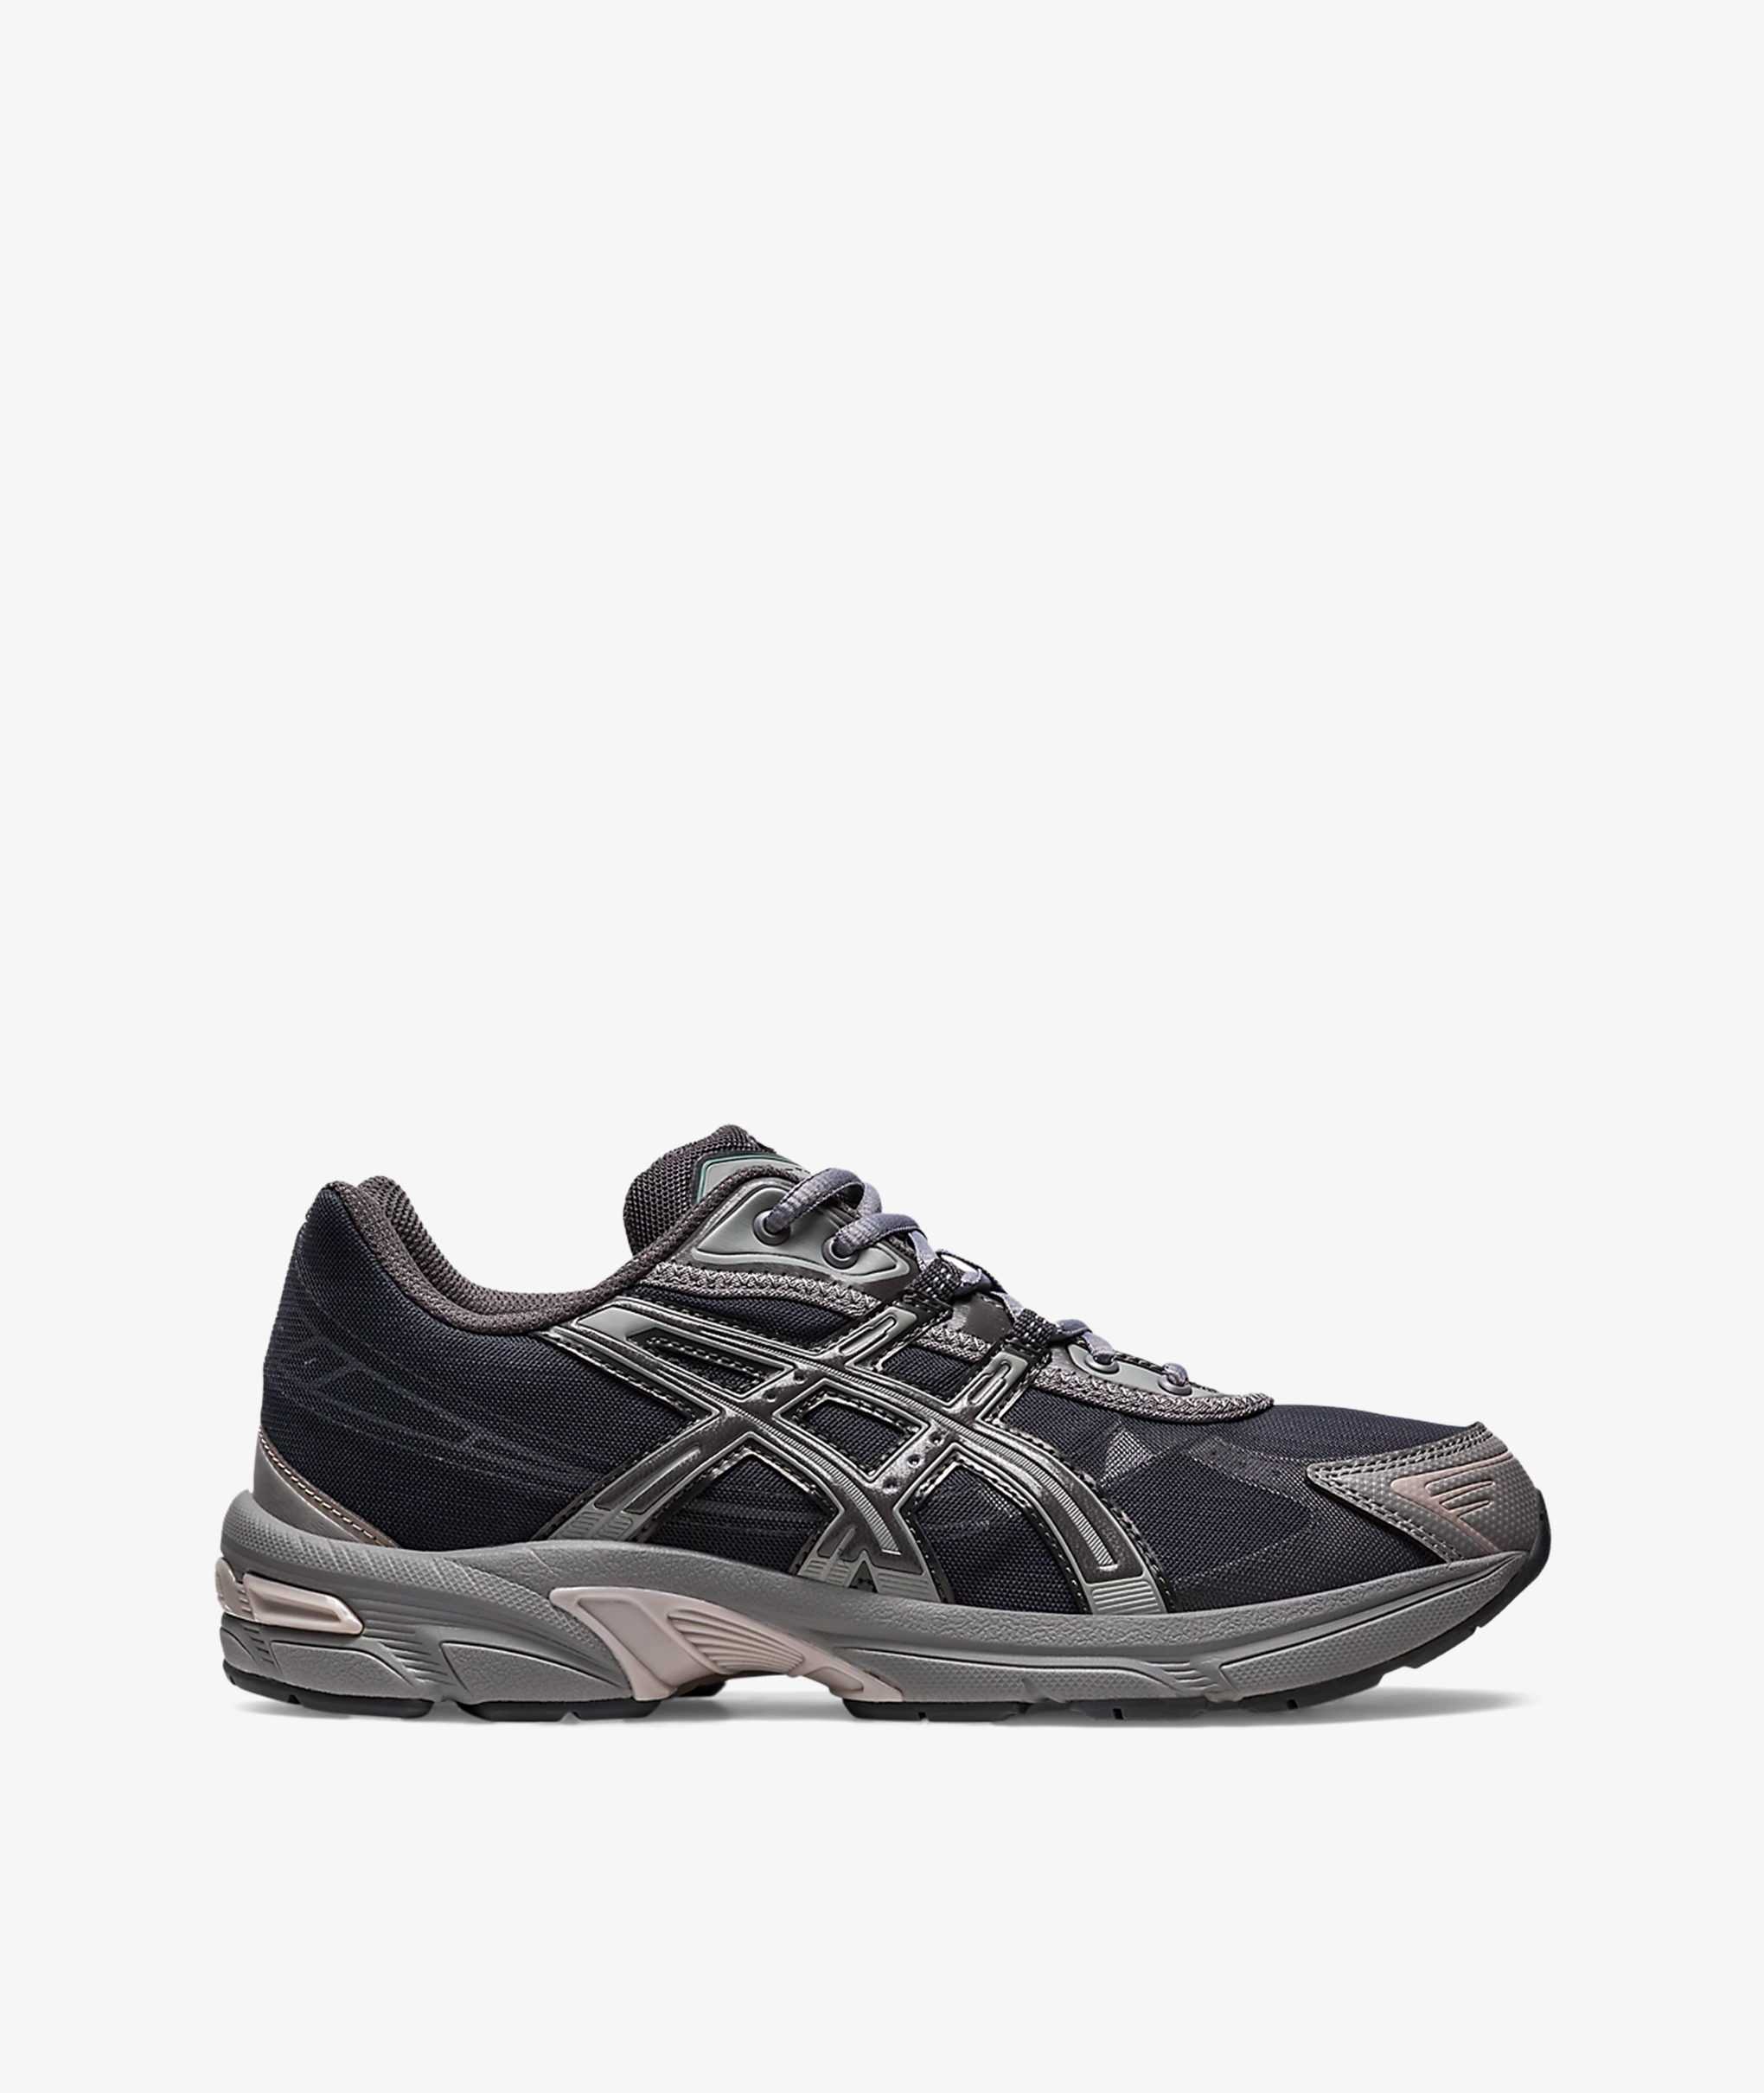 Norse Store | Shipping - Asics GEL-1130 RE Obsidian Grey